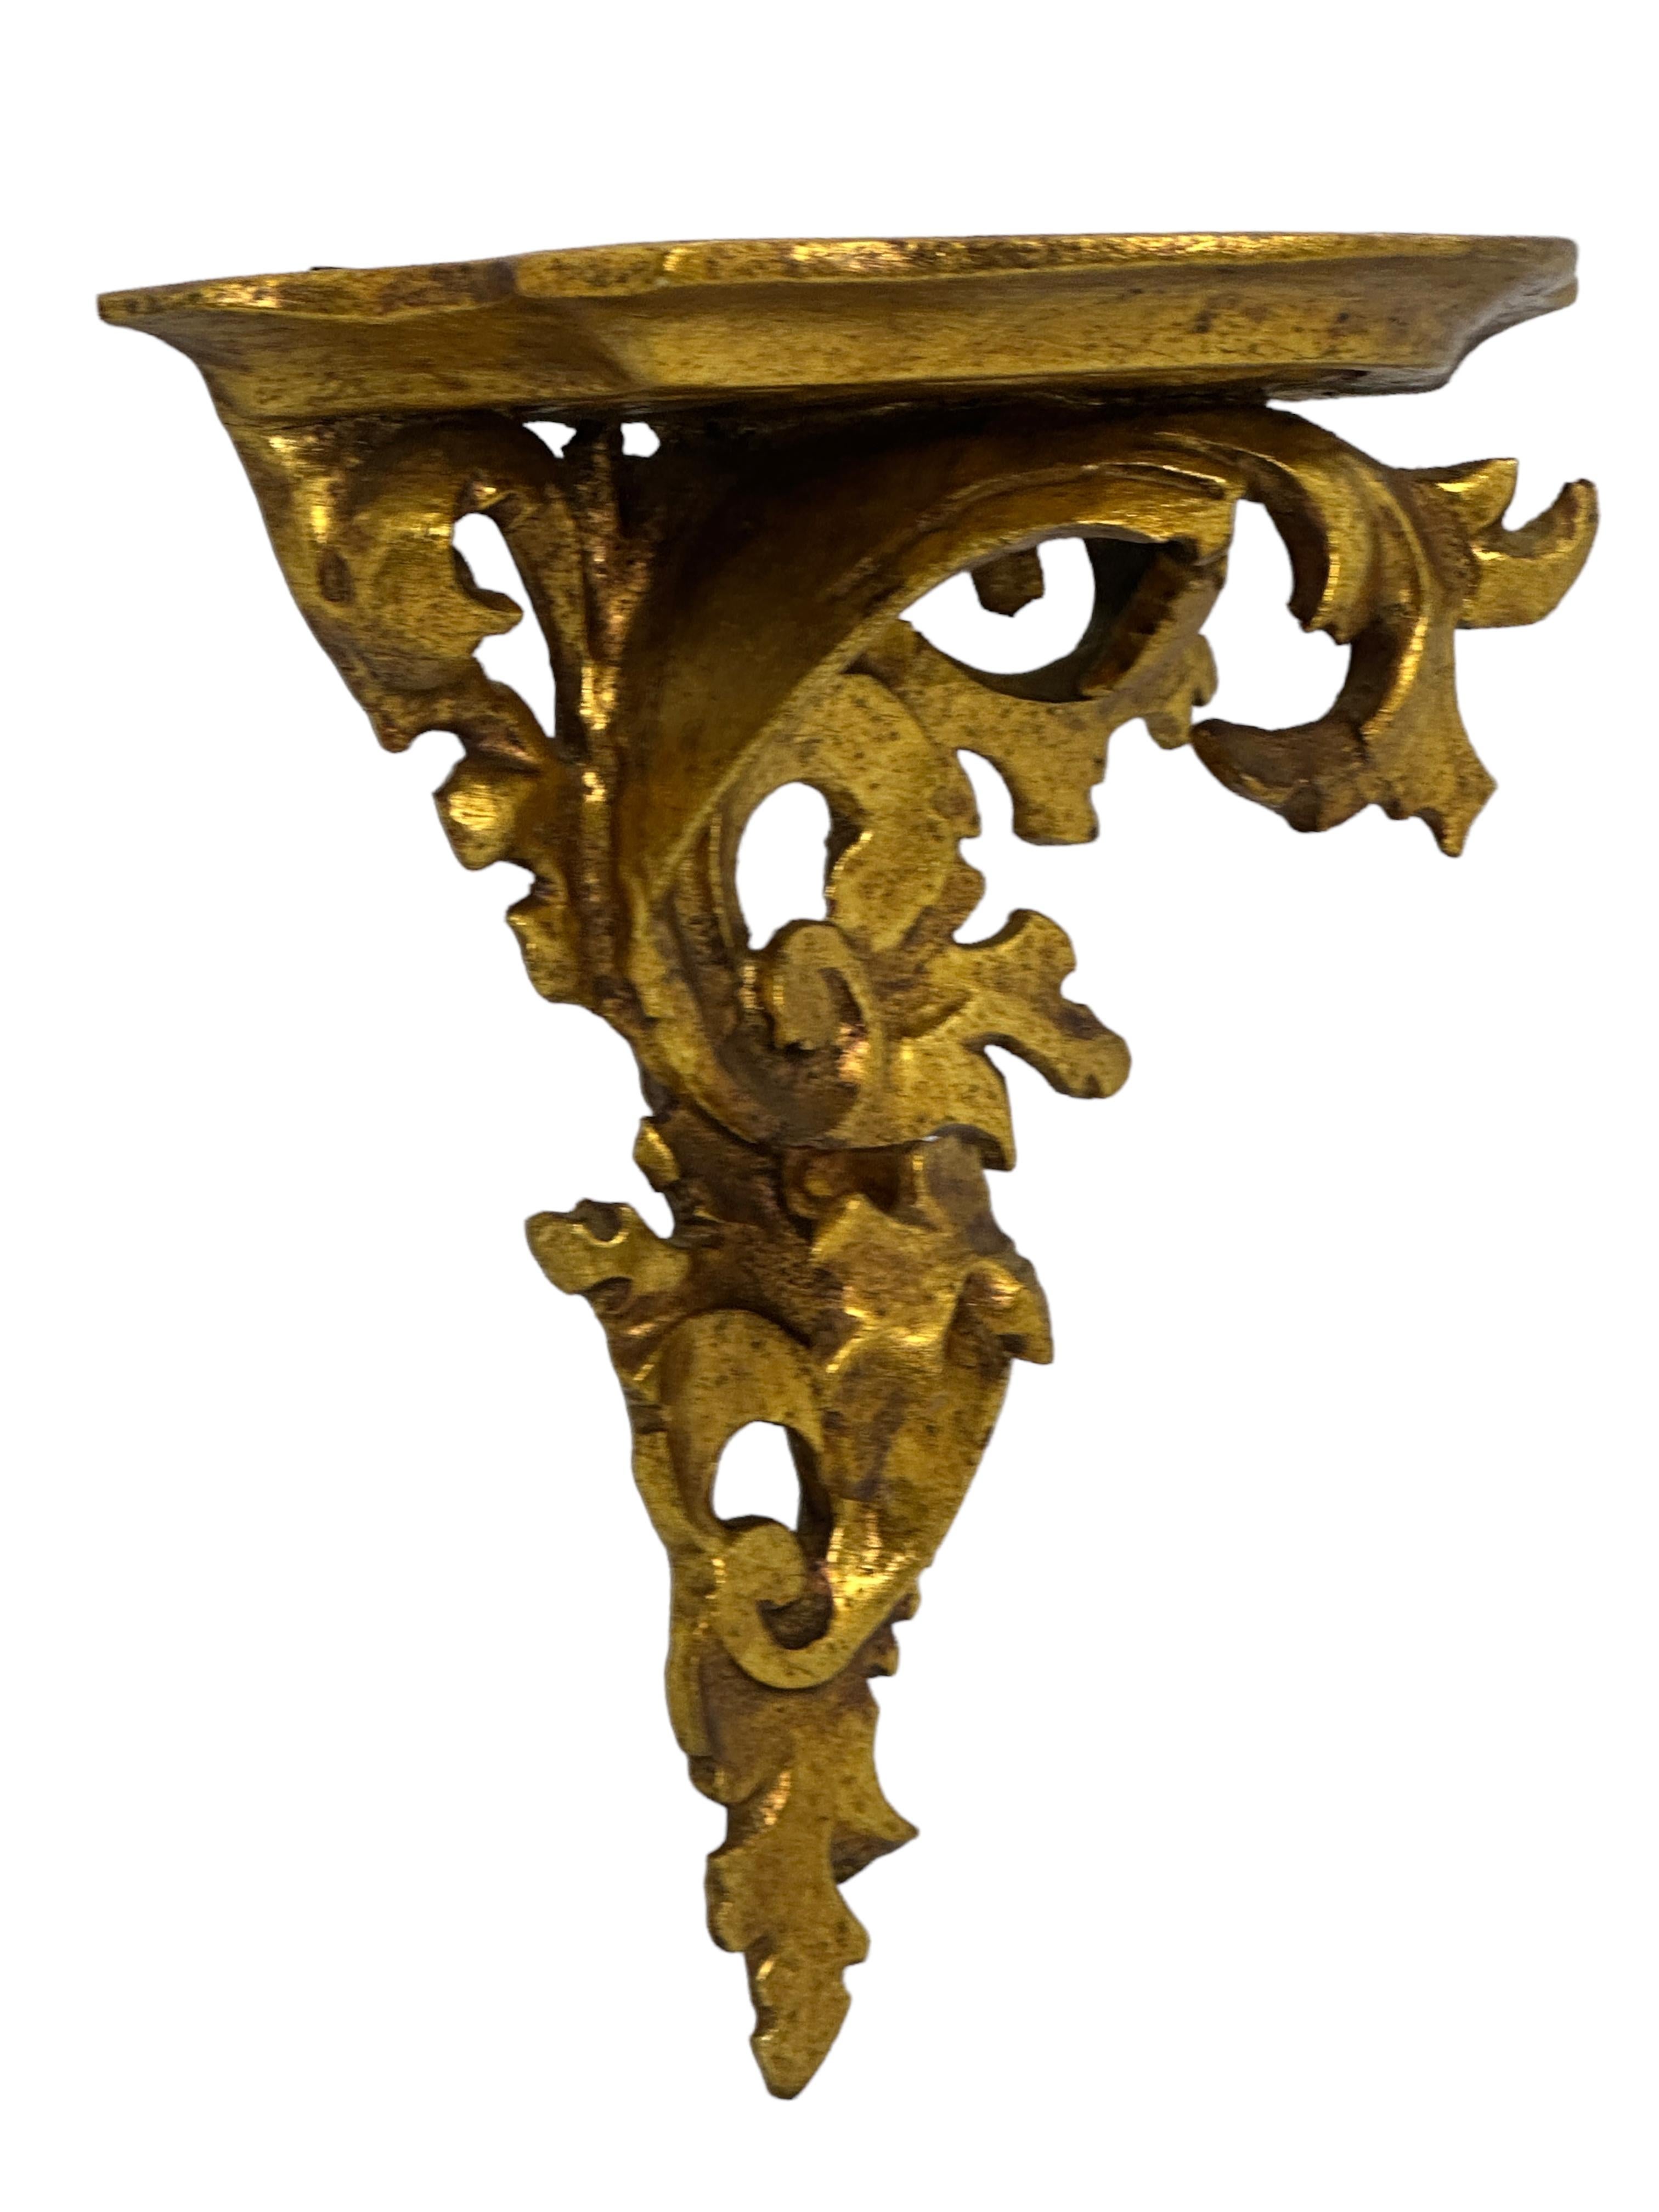 Gilt Italian Old Venetian Miniature Wall Shelf, Gilded Carved Acanthus, Rococo Style For Sale